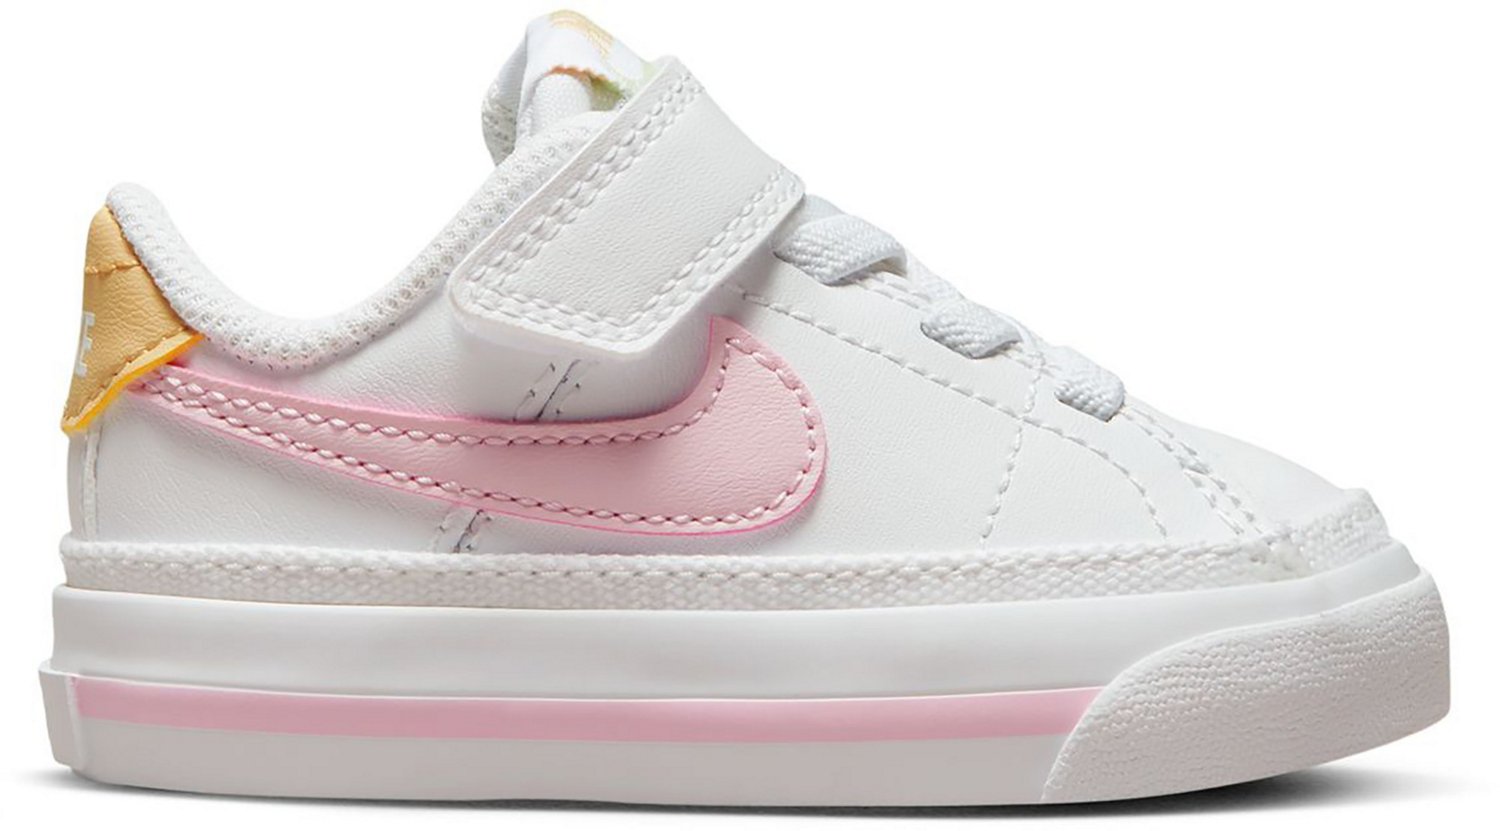 Court at Nike | TD Toddler Shipping Academy Legacy Free